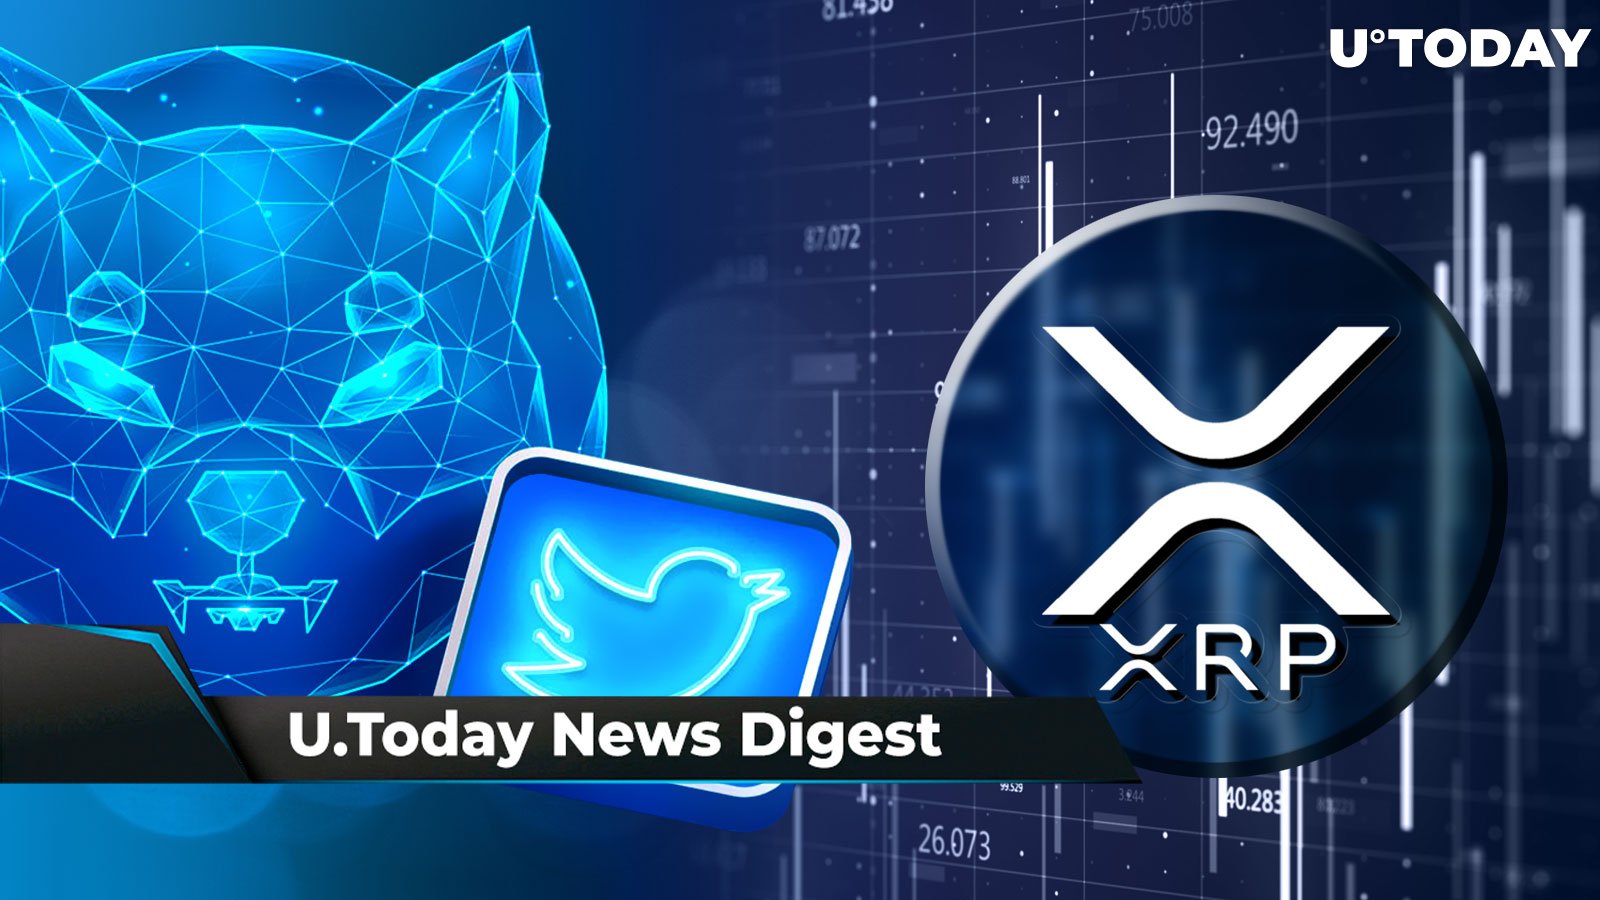 Ripple News: Former Ripple Director Hints at 'Big' XRP Announcement Amid Skepticism